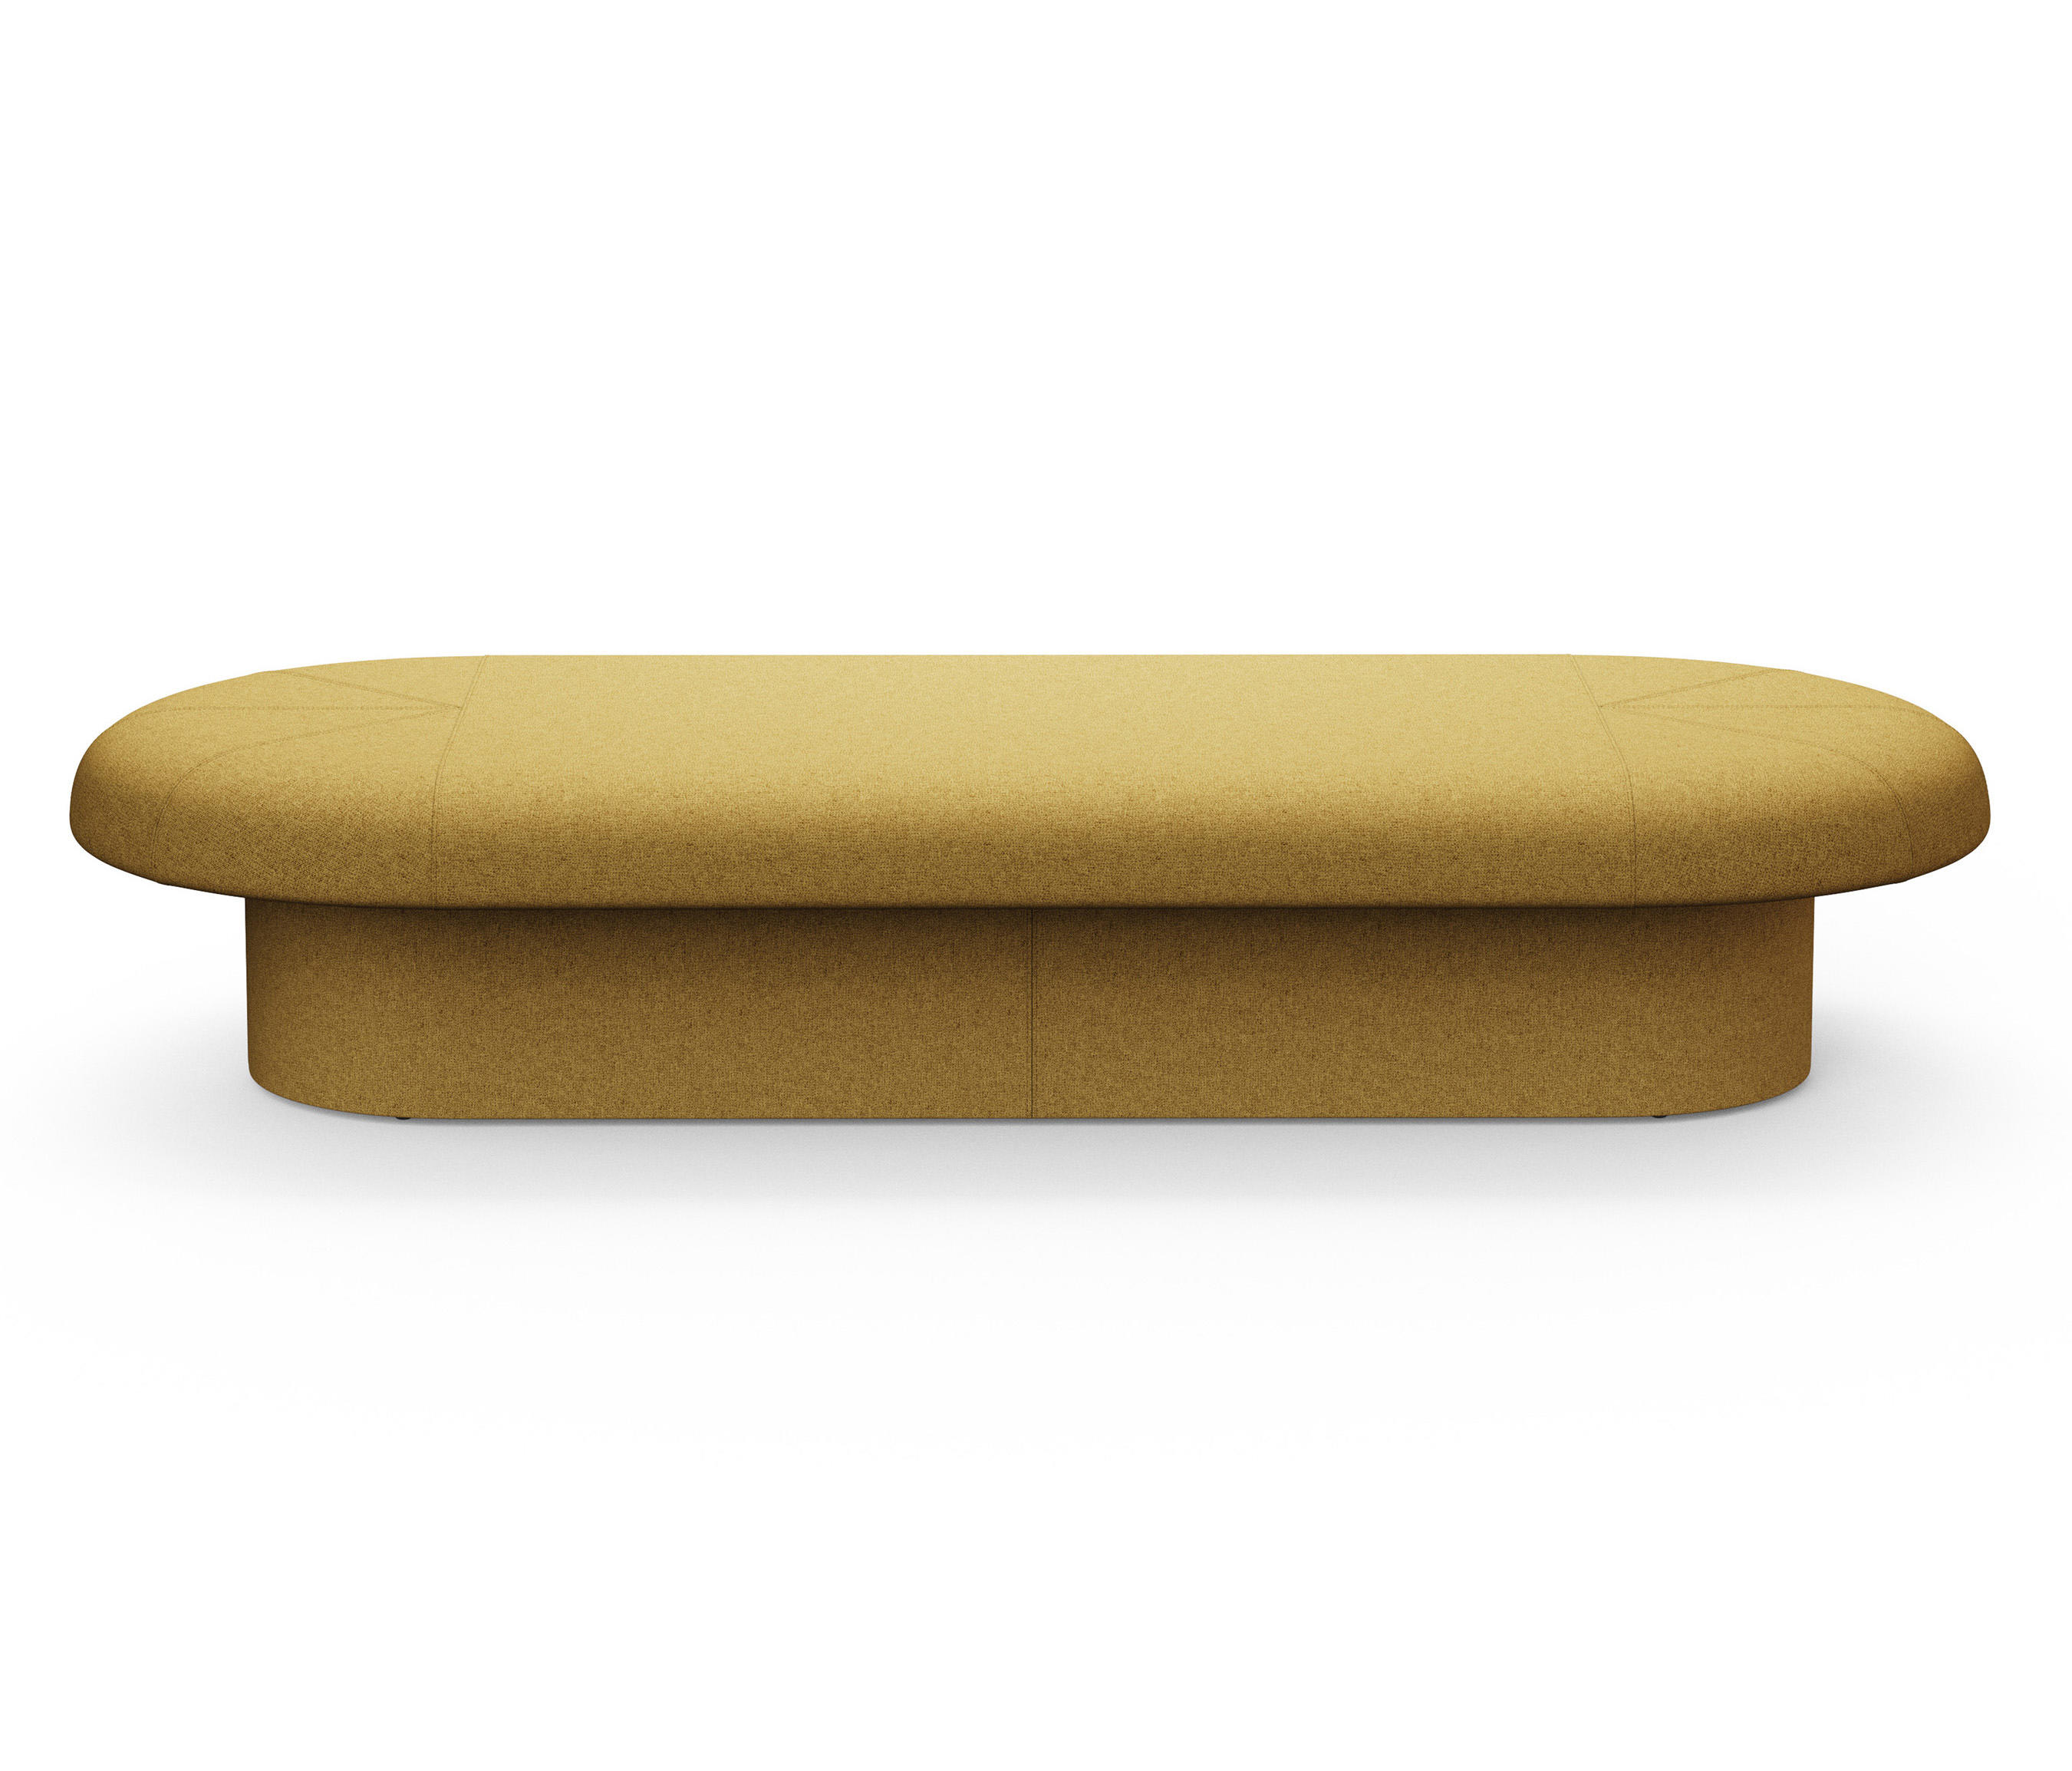 B&T | - islands Design DRAGE BENCH Architonic Seating from